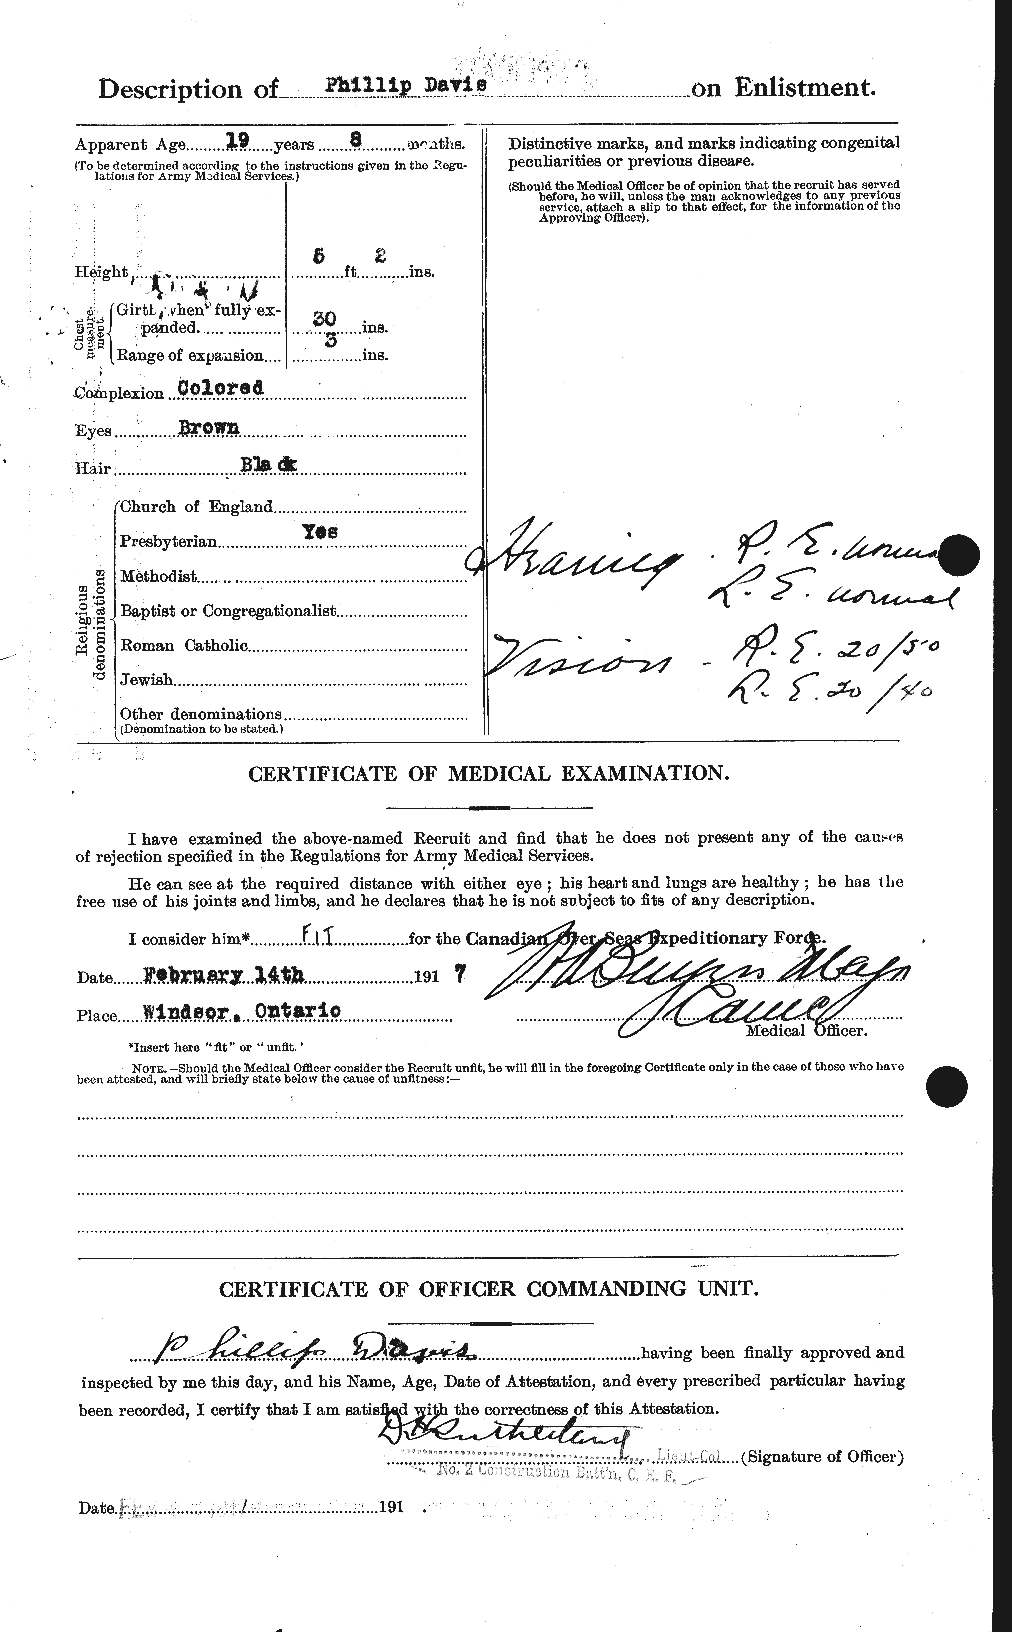 Personnel Records of the First World War - CEF 284228b